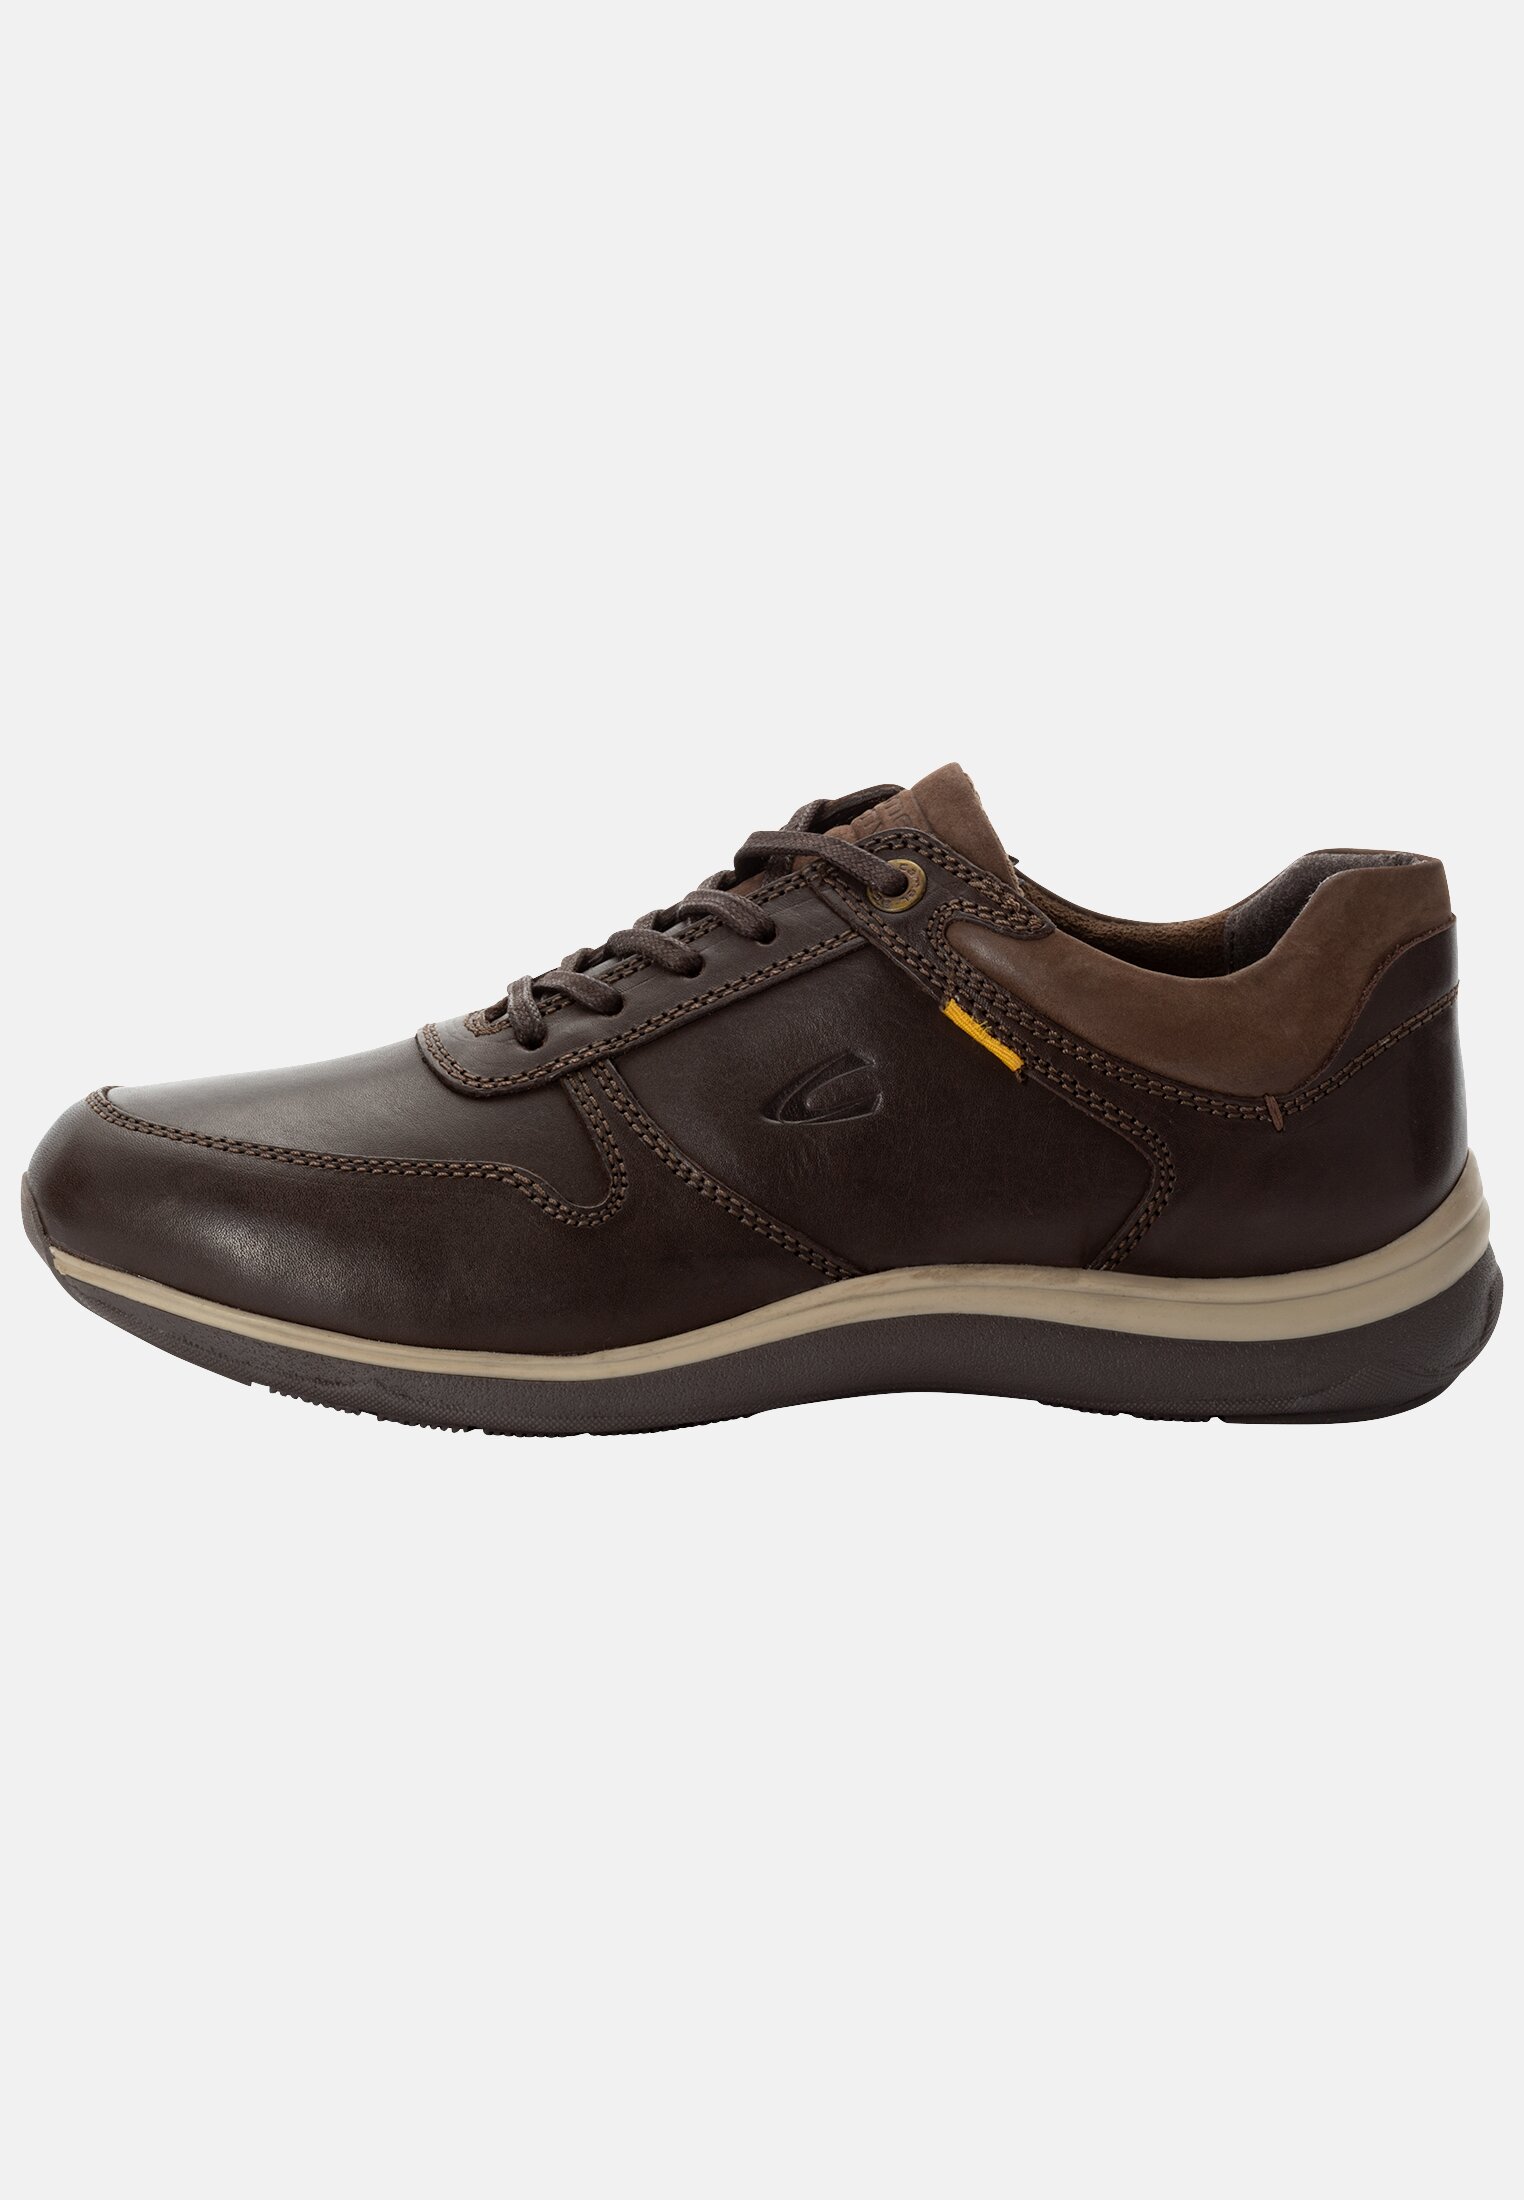 Camel Active Sneaker in genuine leather